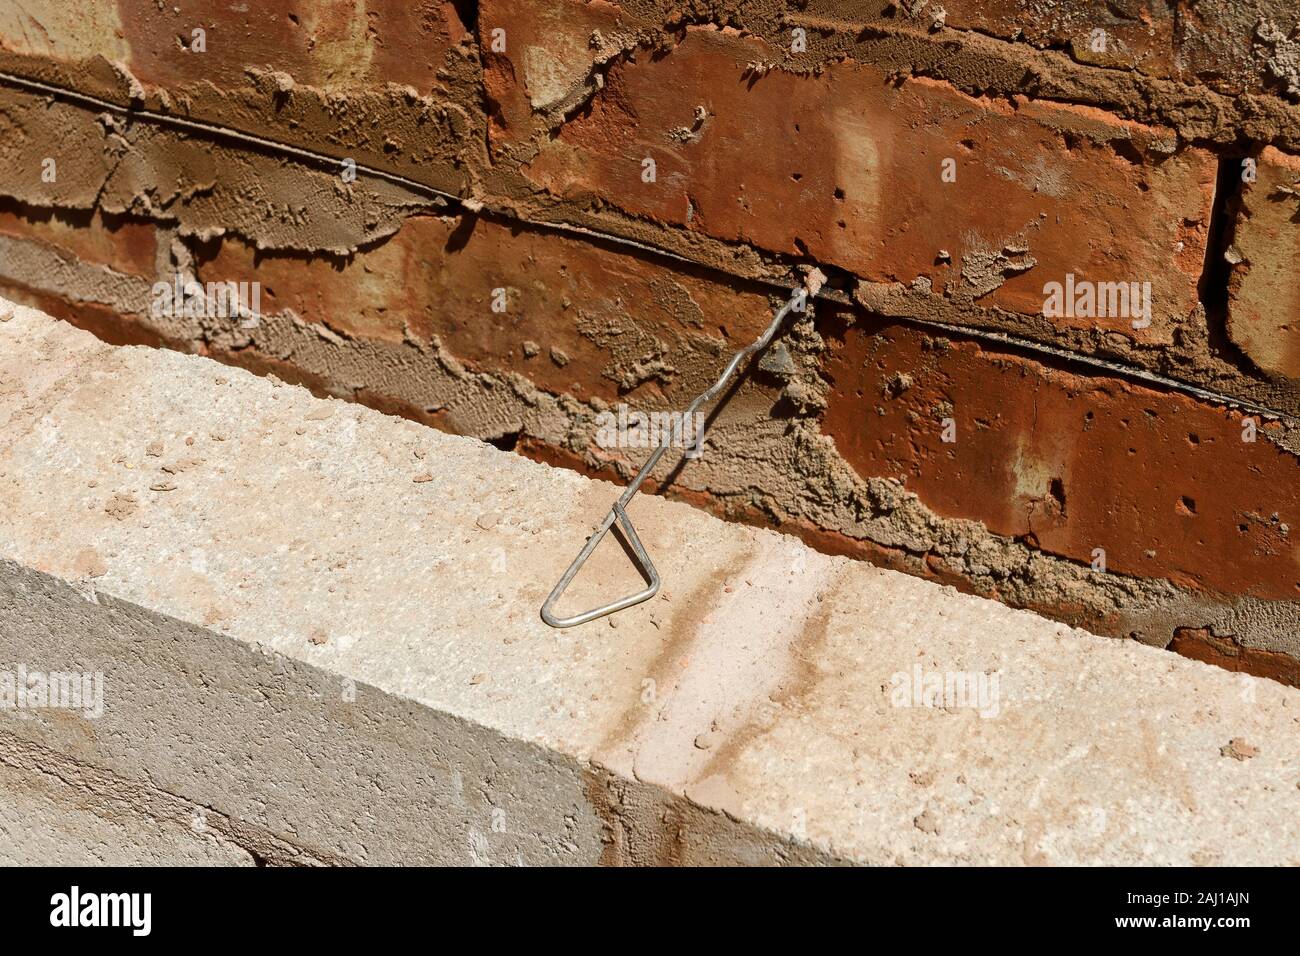 Close up detail of a cavity wall on a UK building site showing the damp proof course and a metal wall tie Stock Photo